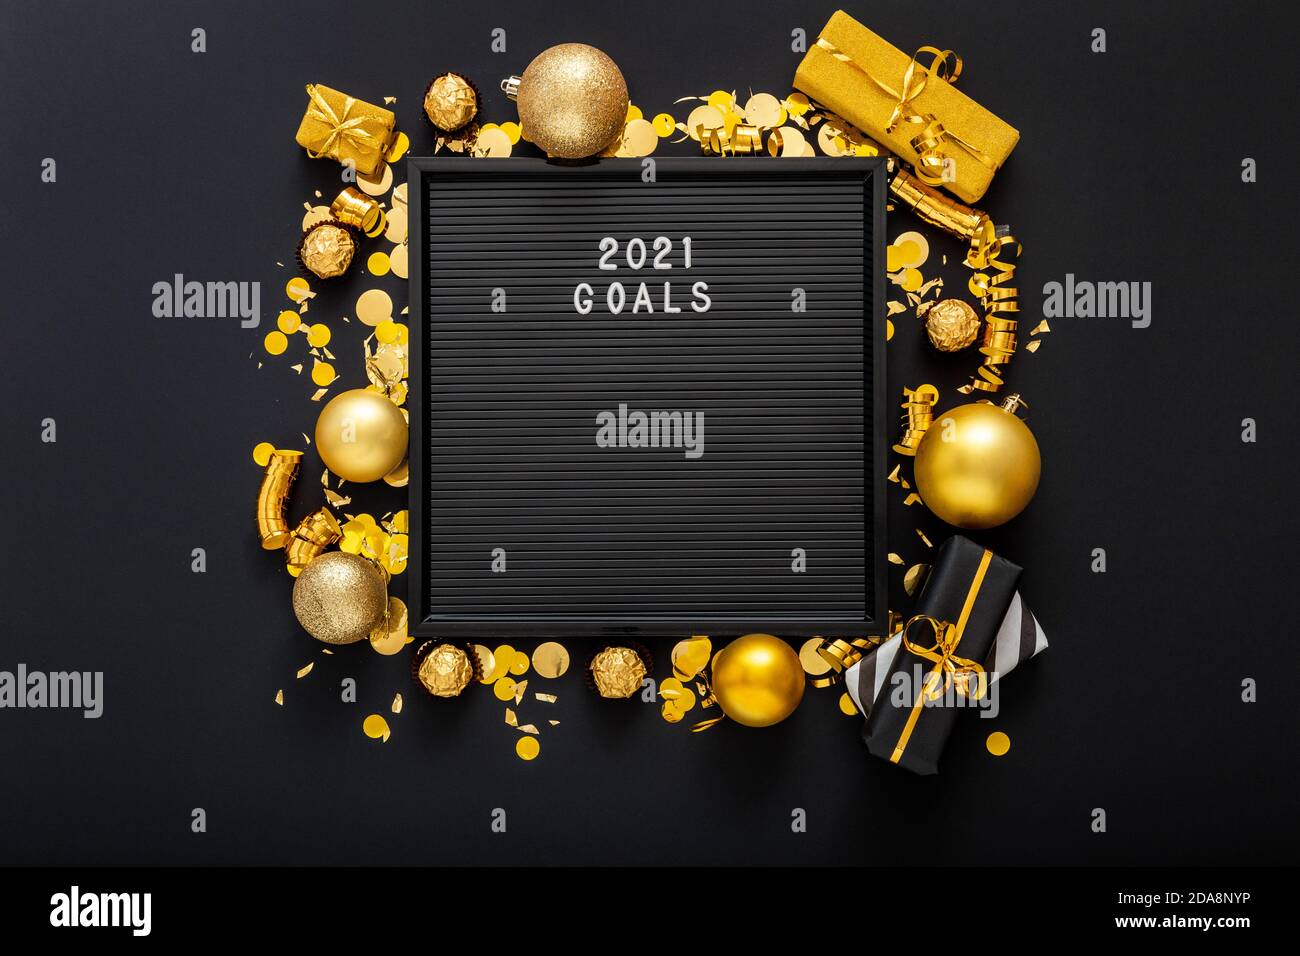 2021 Goals text on black Letter Board in frame made of gold Christmas festive decor, gift boxes, confetti balls. New year 2021 goals, resolution Stock Photo